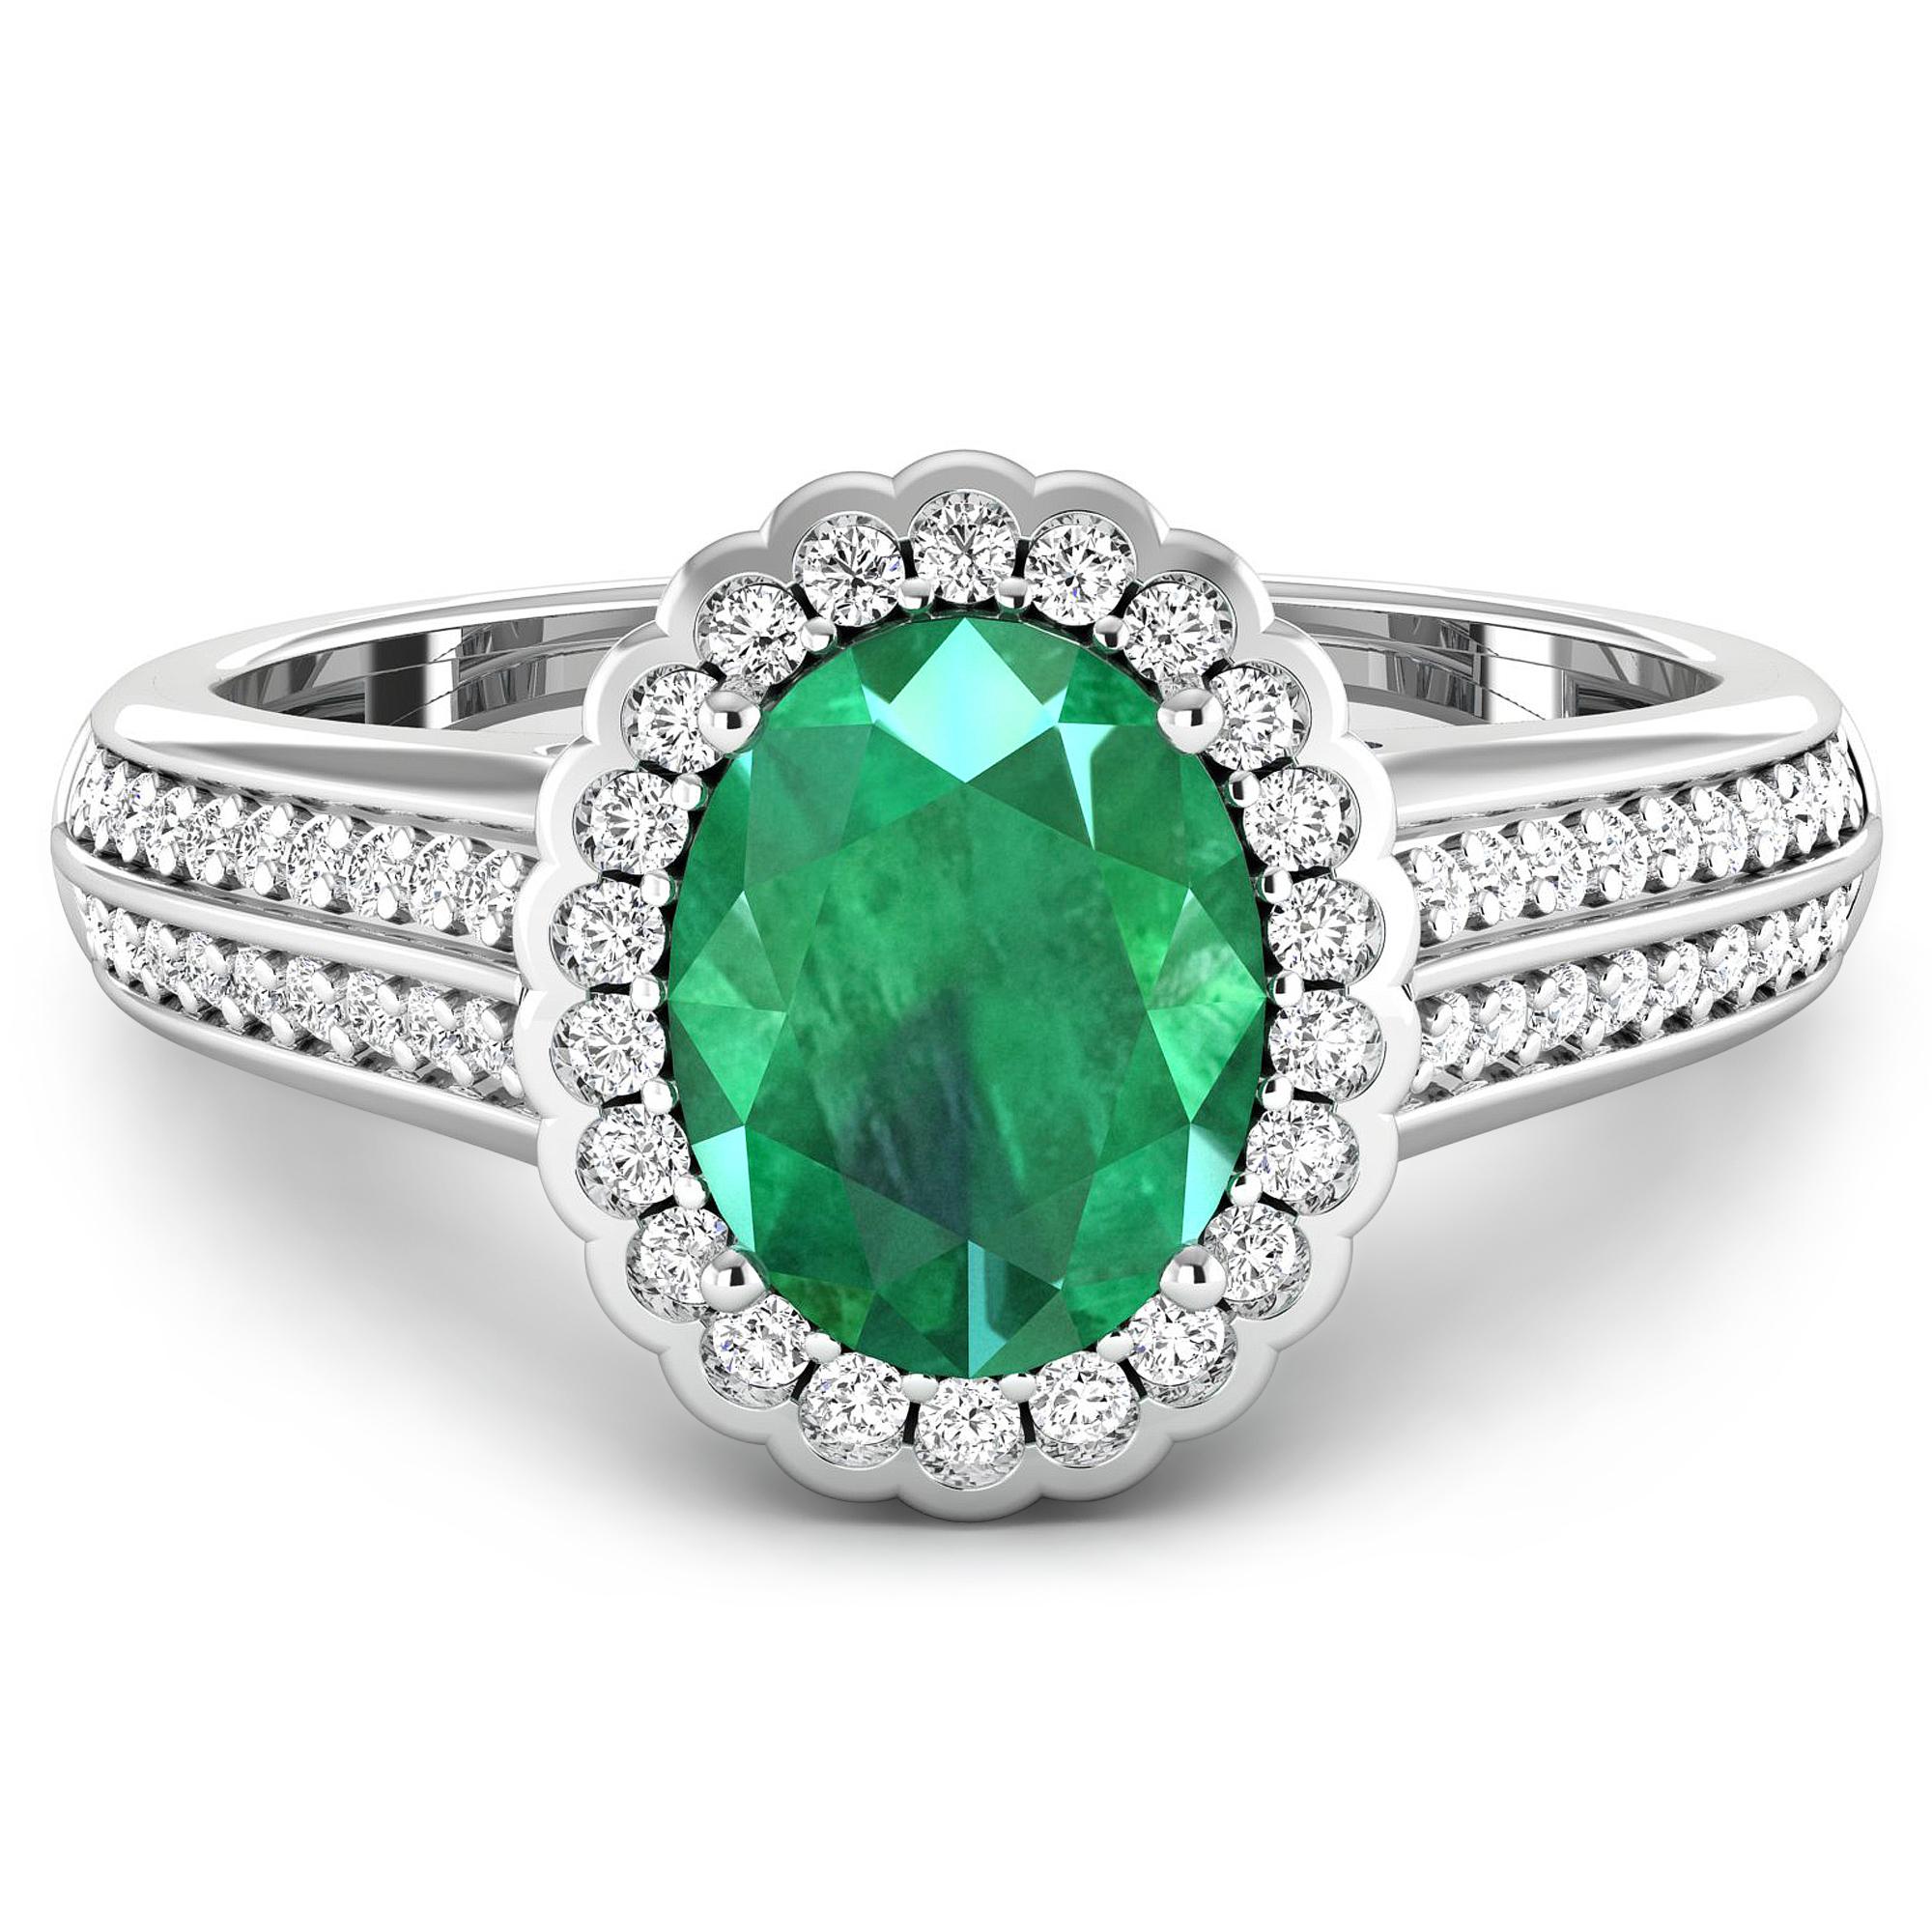 Contemporary Emerald Gold Ring, 14 Karat Gold Emerald and Diamond Ring, 2.07 Carat For Sale